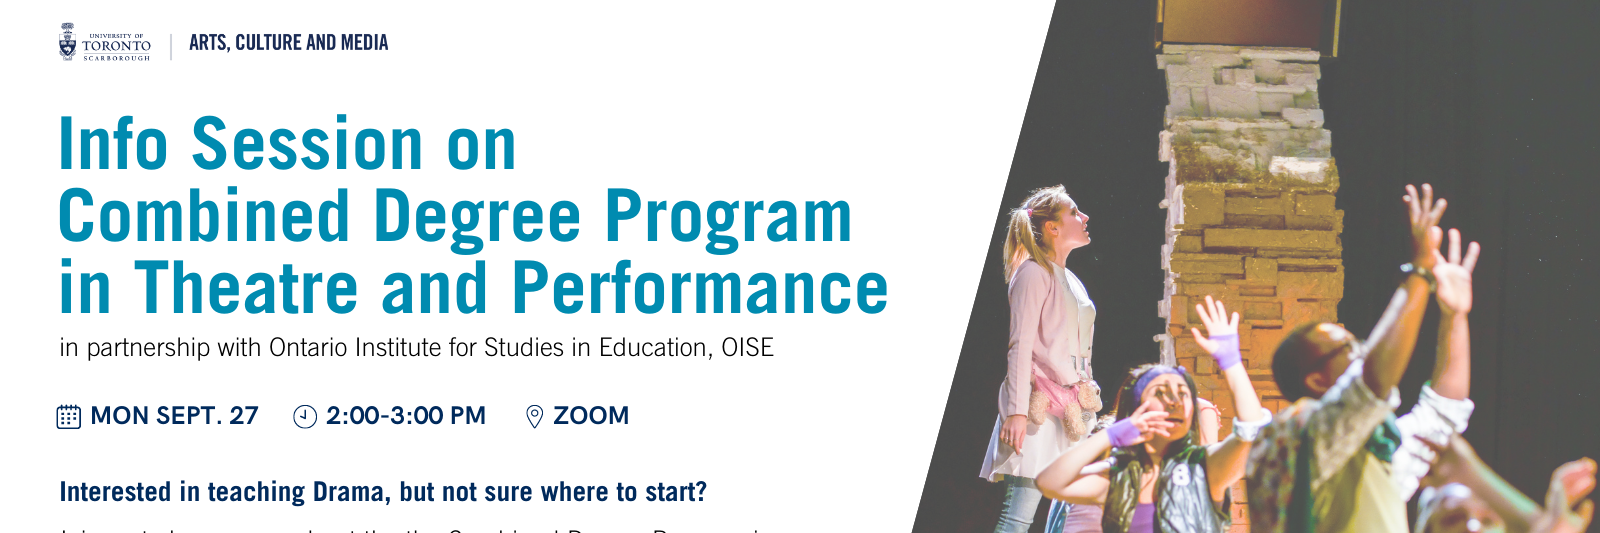 Info Session on Combined Degree Program in Theatre and Performance Banner